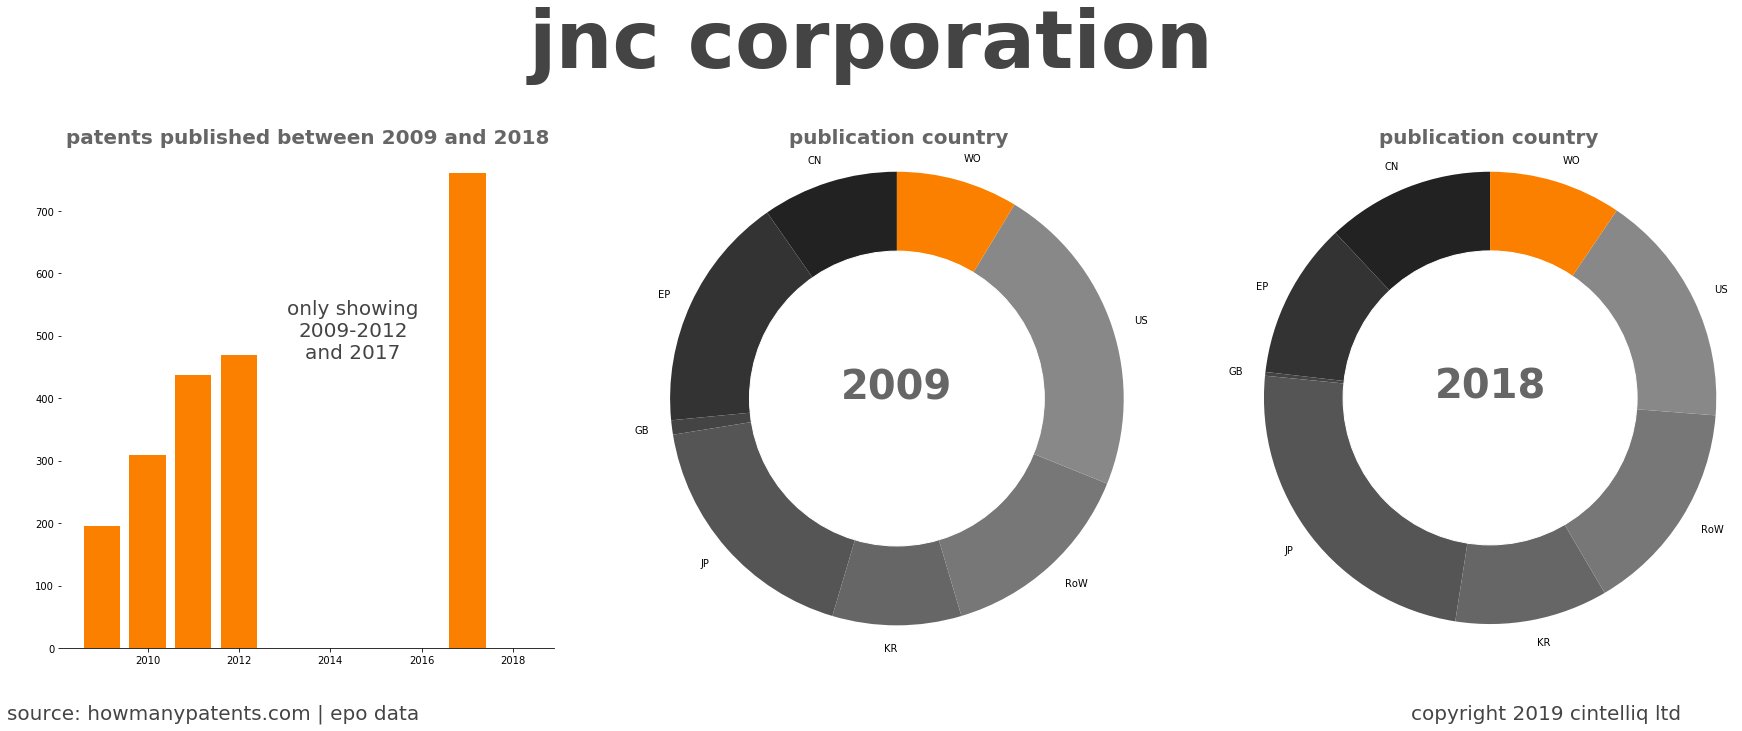 summary of patents for Jnc Corporation